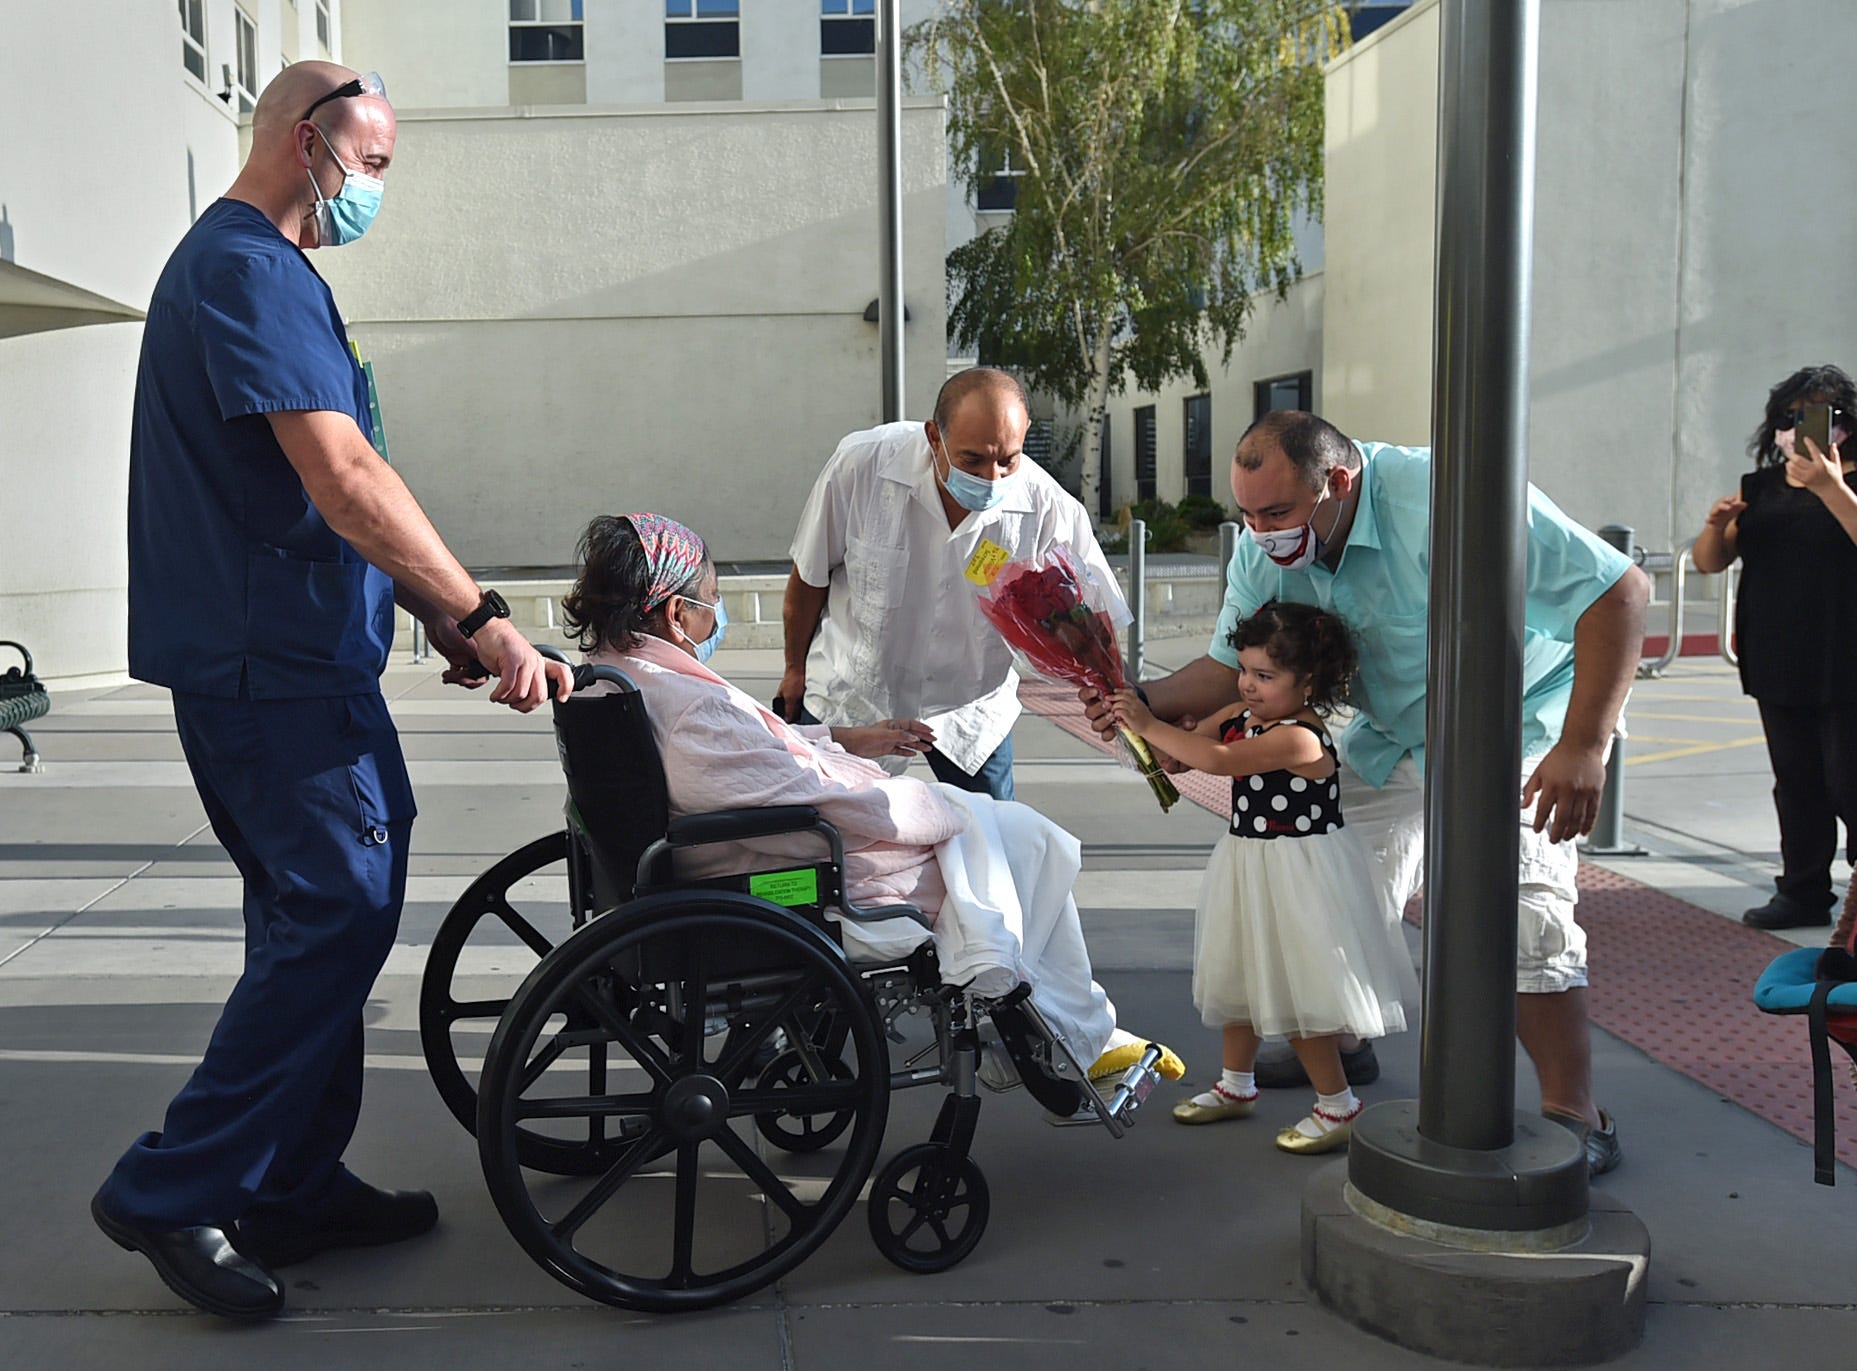 Patricia Villaseca's family approach her as she is wheeled out of from Saint Mary's Regional Medical Center after being hospitalized 5 months after contracting COVID-19 in April 2020. Left to right is her husband Jorge Franco, her son-in-law Chris Camacho and granddaughter Gadi, 4. They waited 2 hours for her to be discharged form the hospital.